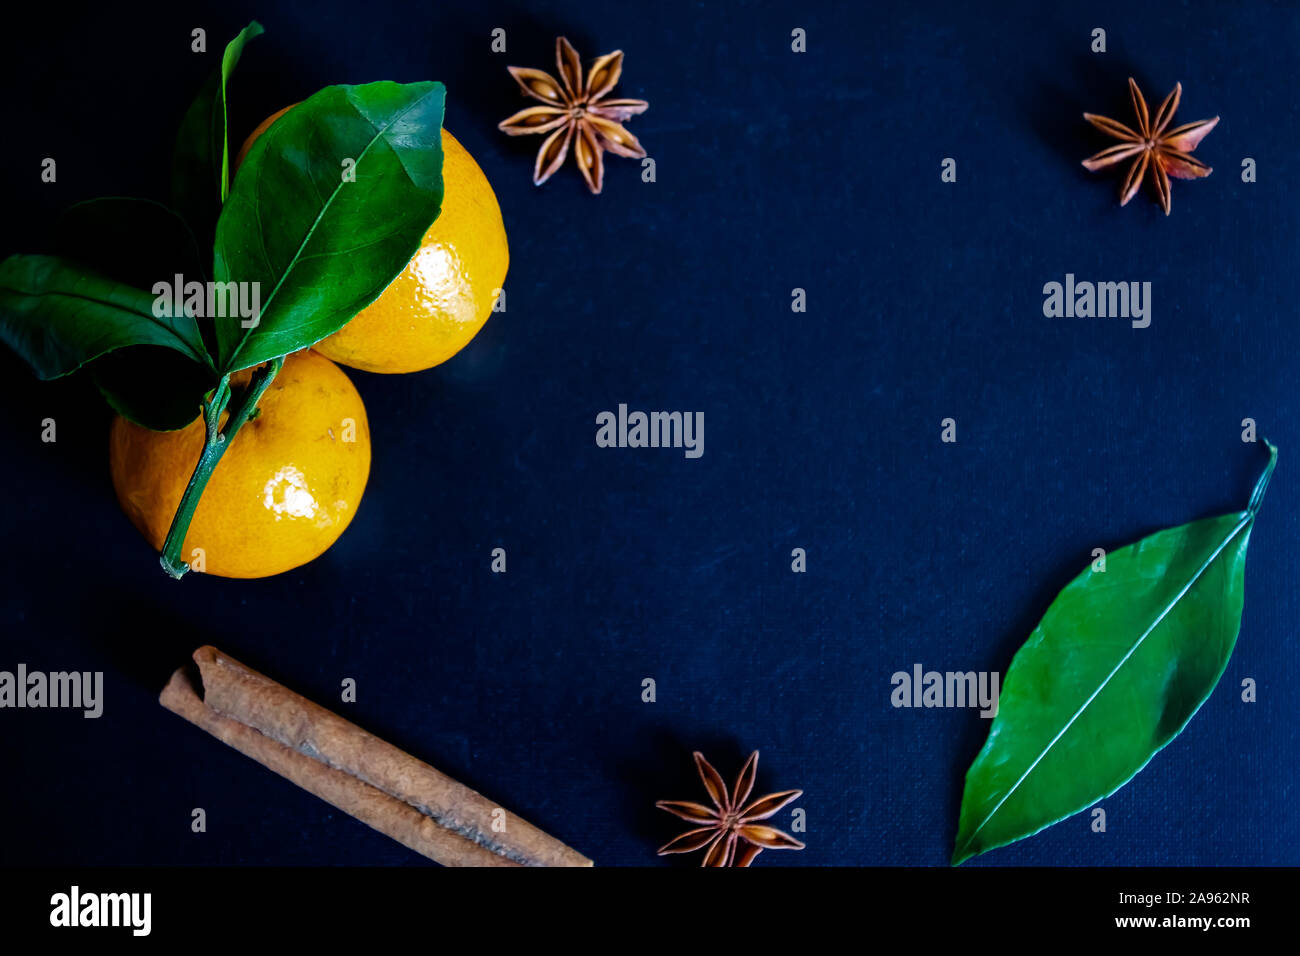 Dark textured christmas background with two tangerines, citrus leaves, star anise and cinnamon sticks. Background for banner. view from above. Stock Photo